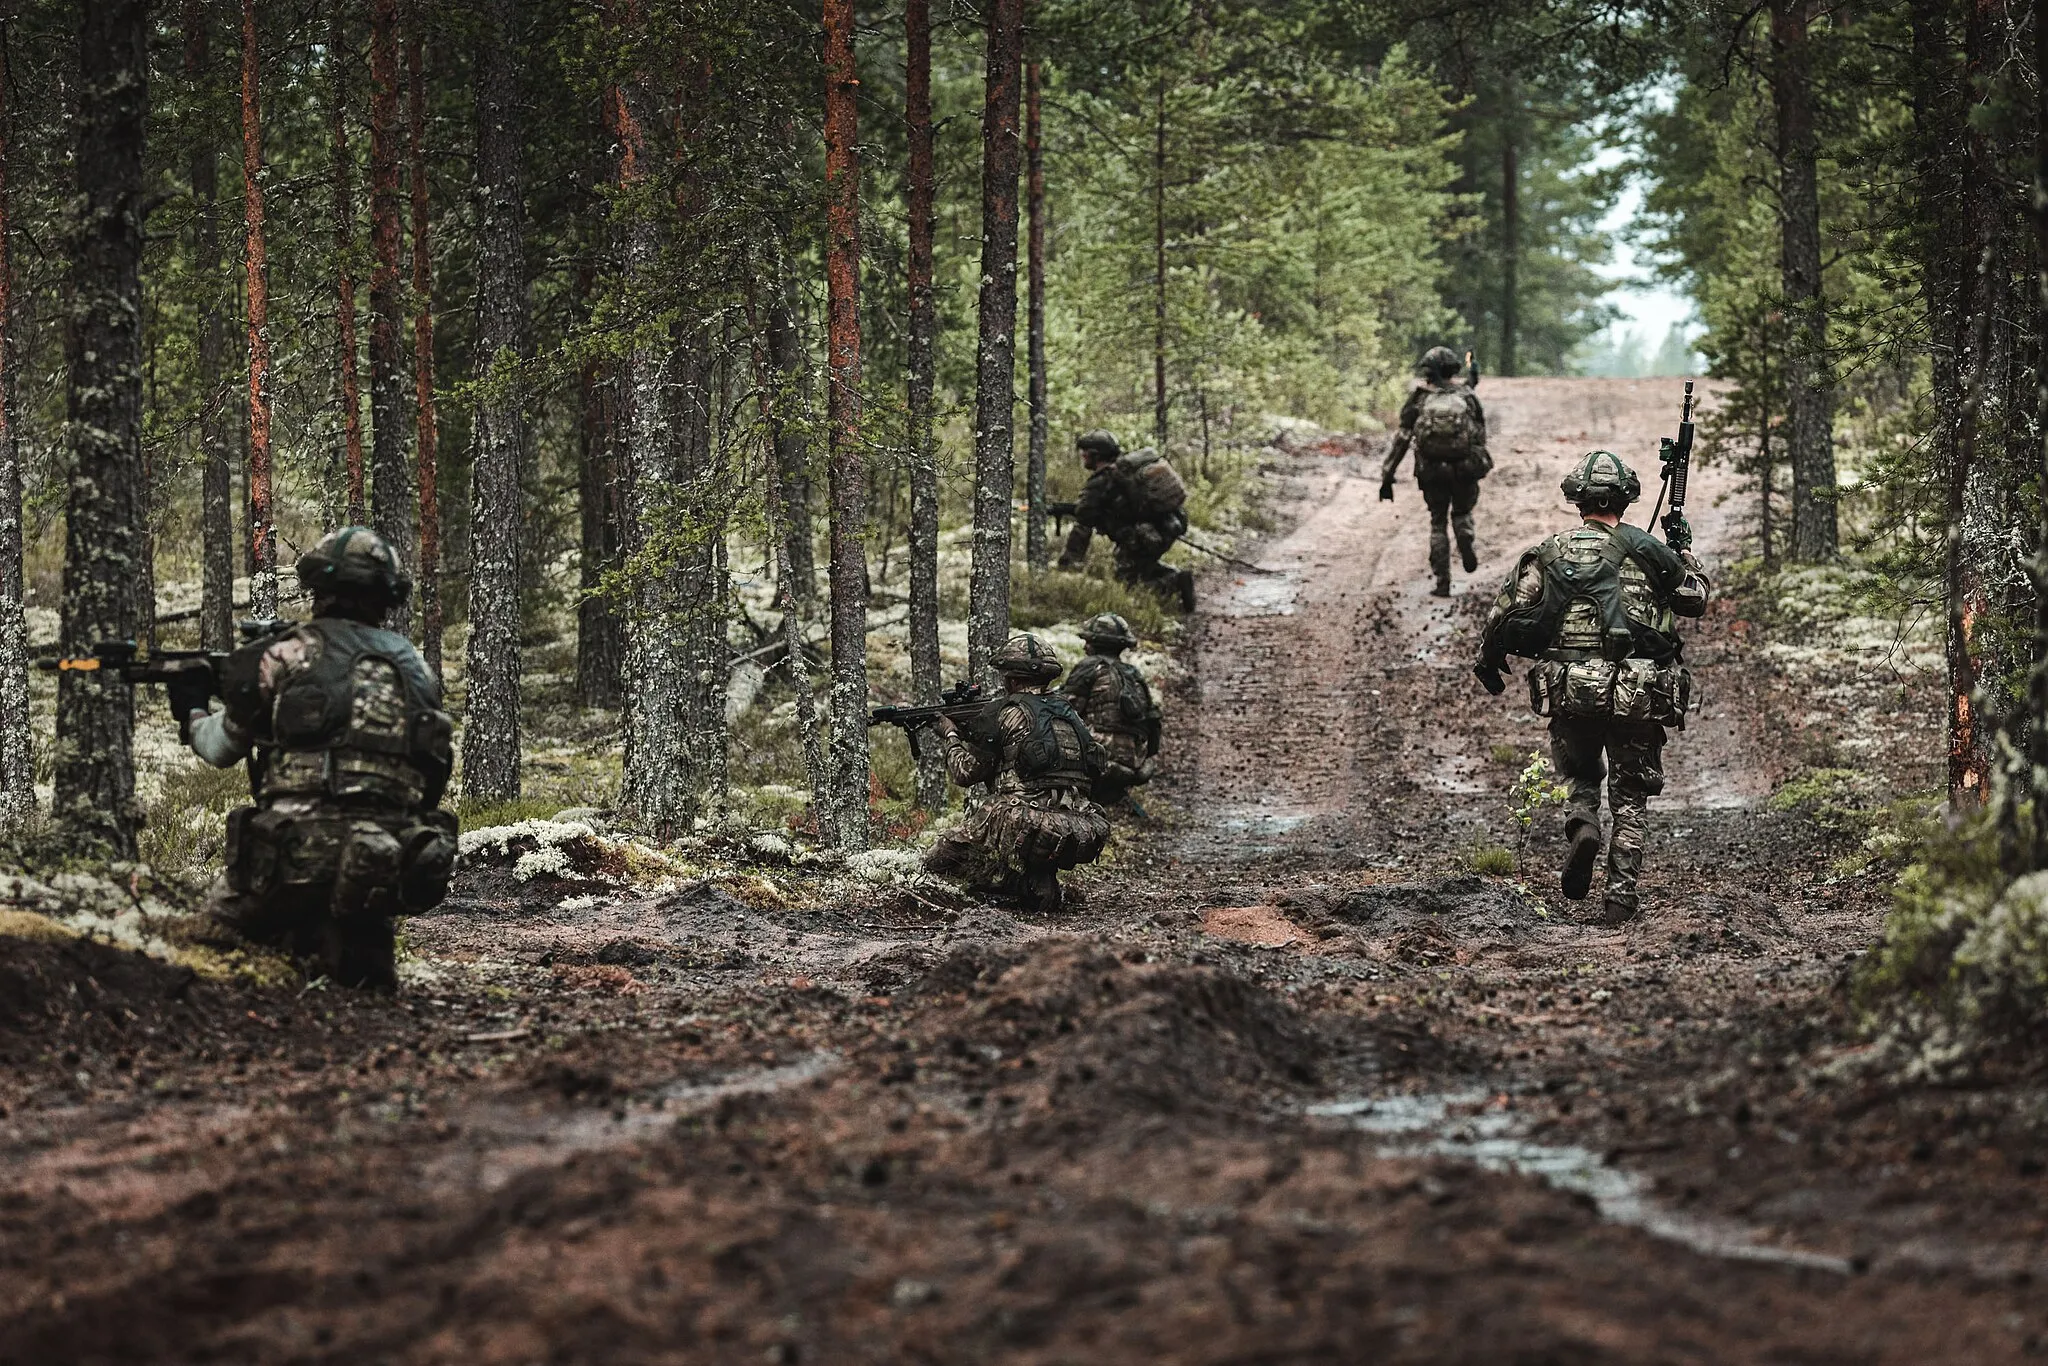 Photo showing: Soldiers from the British Army attempt to flank the enemy by running up a track with cover provided by the trees and other members of the section during Exercise Vigilant Fox in Finland. EXERCISE VIGILANT FOX is a force-on-force readiness training exercise at Niinisalo in western Finland. The exercise is intended to test the preparedness of Finland’s High Readiness Brigades whilst enhancing interoperability between Finland, UK, and US forces.Units involved in the exercise include C Company (C COY) 2nd Battalion The Rifles (2 Rifles) of the UK’s Agile Task Force usually deployed in Estonia, the Jaeger Guard Regiment (FIN), Pori Brigade (FIN) and Karelian Brigade (FIN) and a Coy of US Cavalry using the Bradley tracked fighting vehicle. The exercise also provides an opportunity to practise land-air integration as troops will be transported to the training area by RAF Chinook helicopter from C Coy 2 Rifle’s temporary base at Santahamina Island, Helsinki.